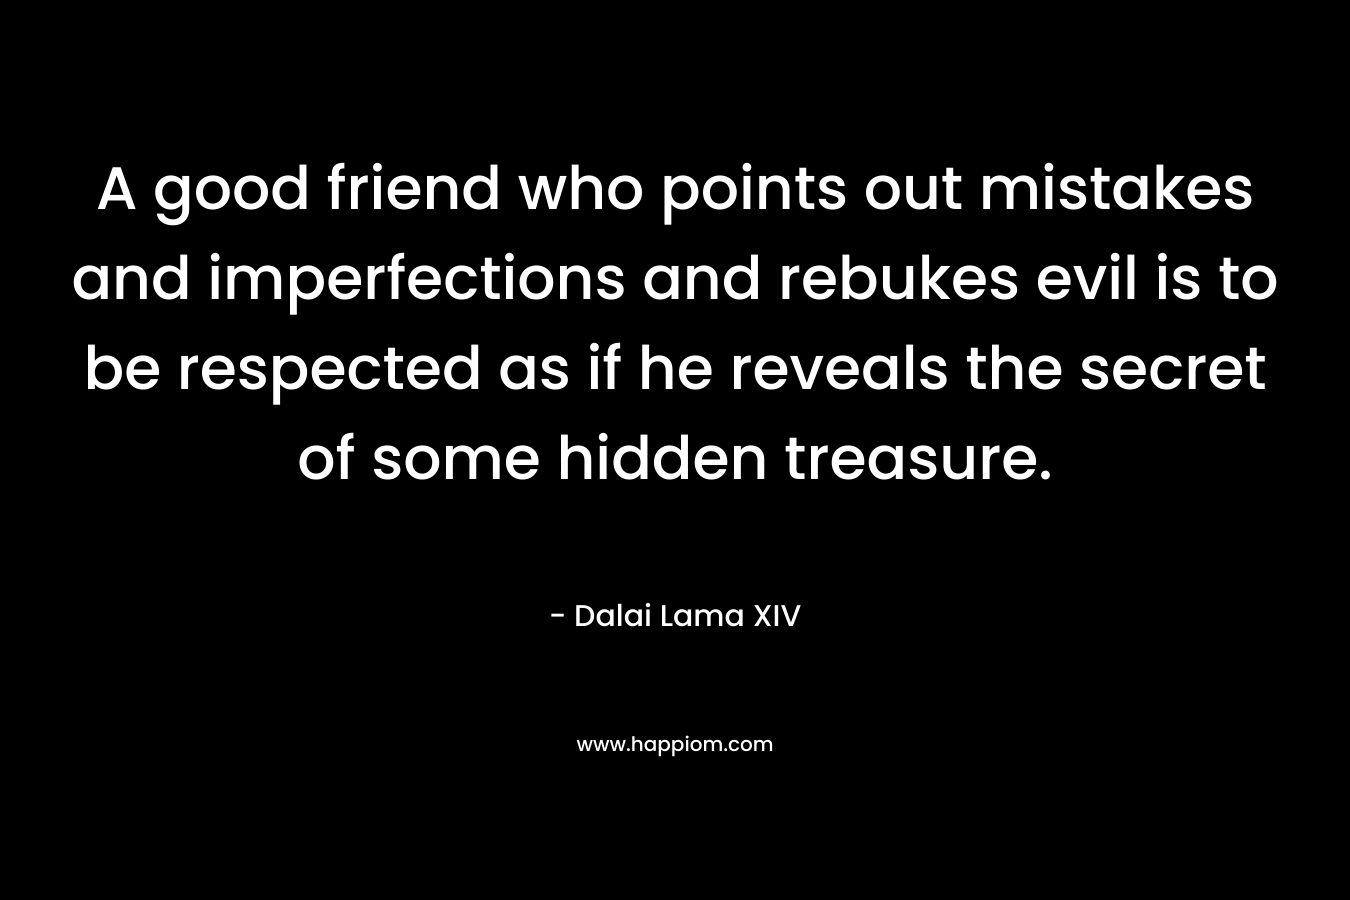 A good friend who points out mistakes and imperfections and rebukes evil is to be respected as if he reveals the secret of some hidden treasure.